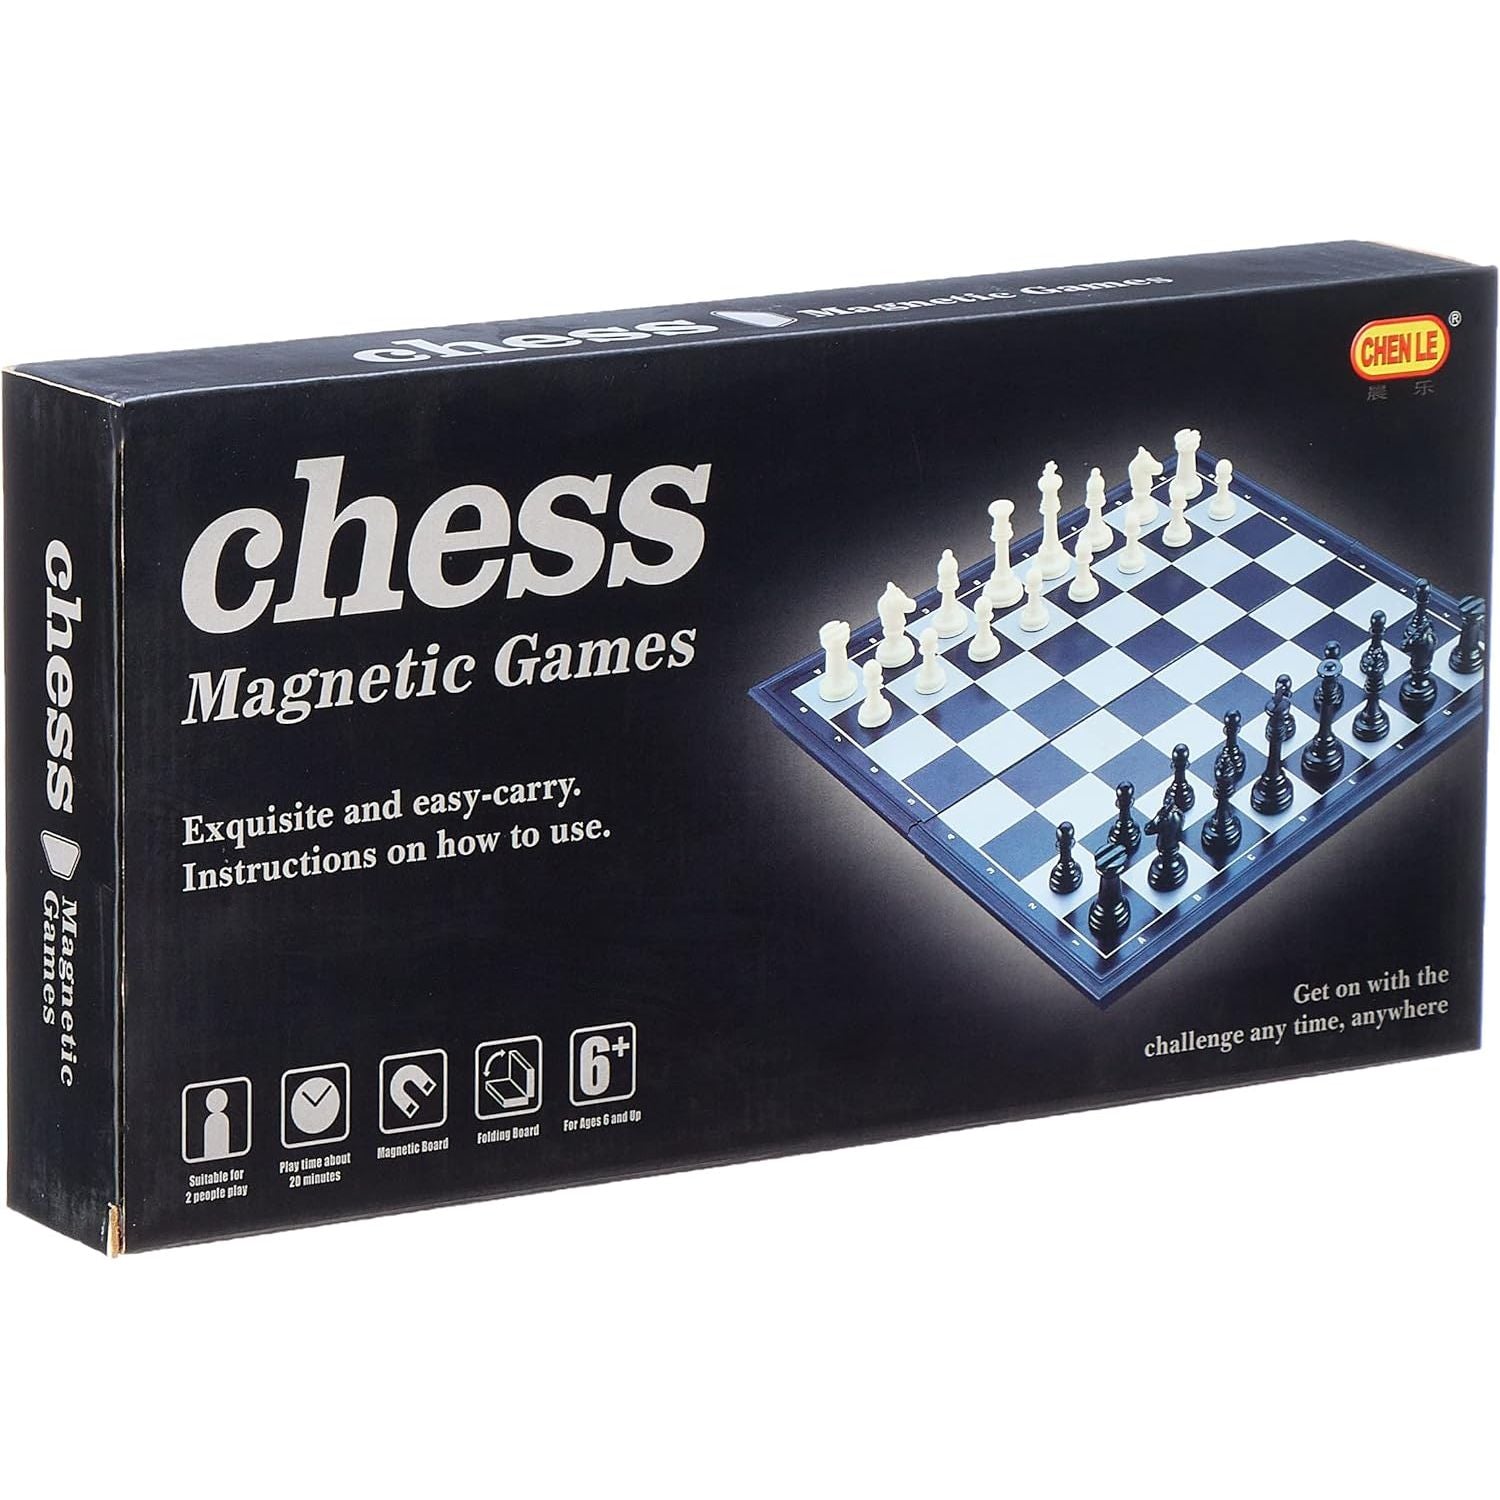 International Chess Set Game For Adult 98801 Multi Color